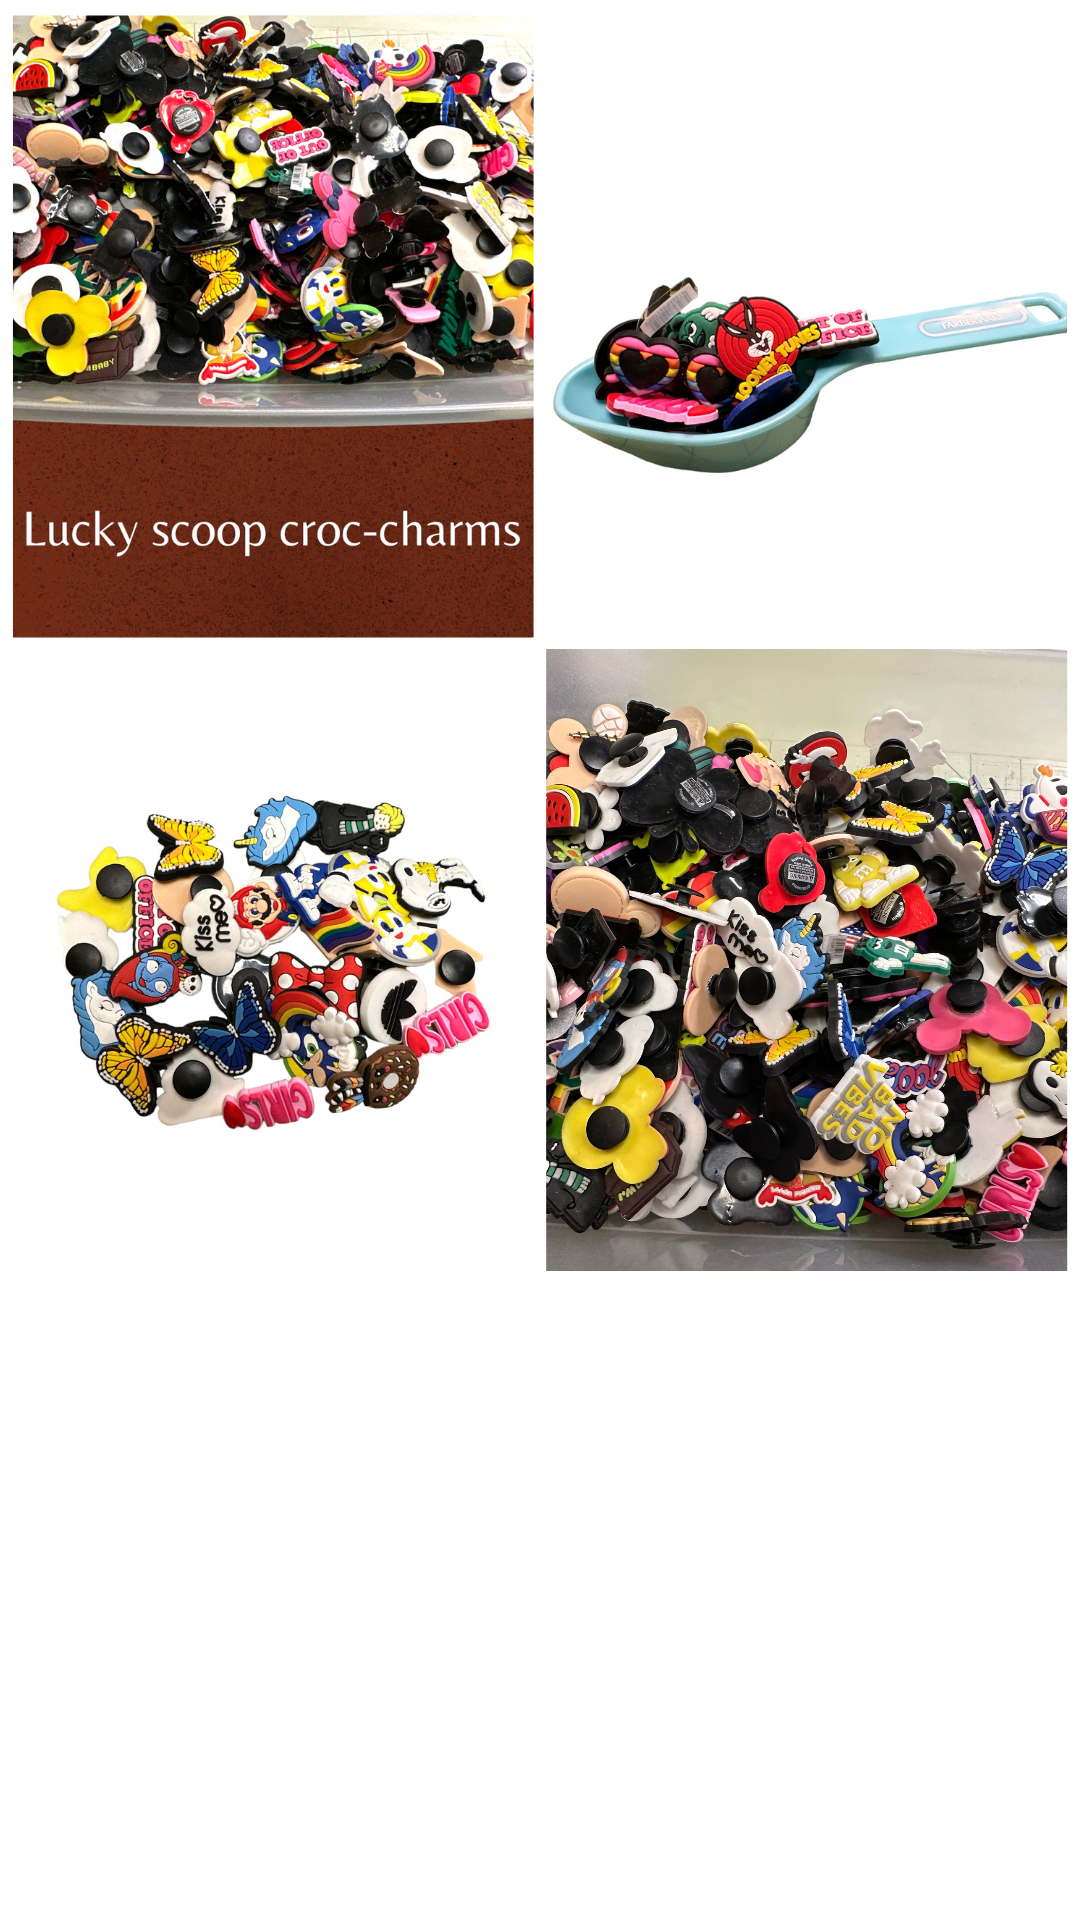 Croc-Charms Lucky scoop